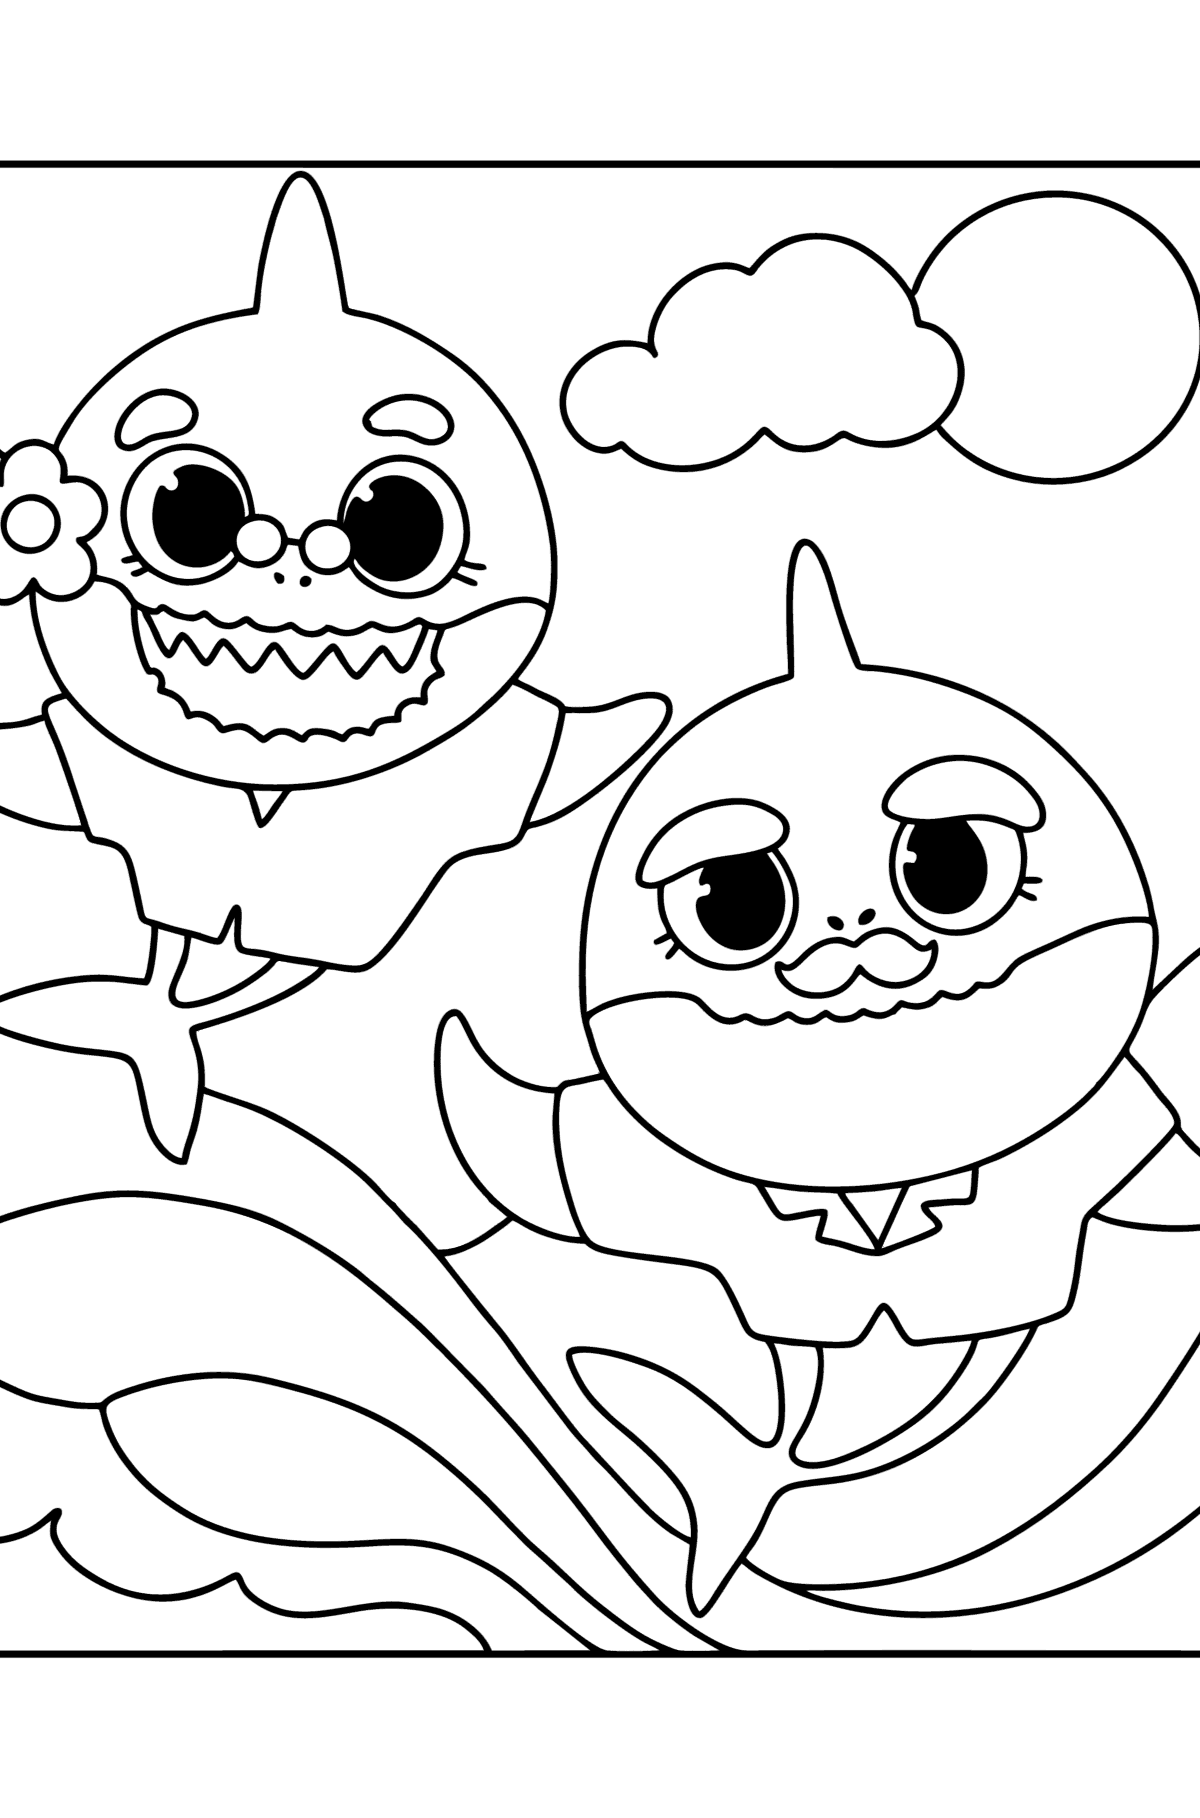 Grandma and grandpa Baby shark coloring page - Coloring Pages for Kids